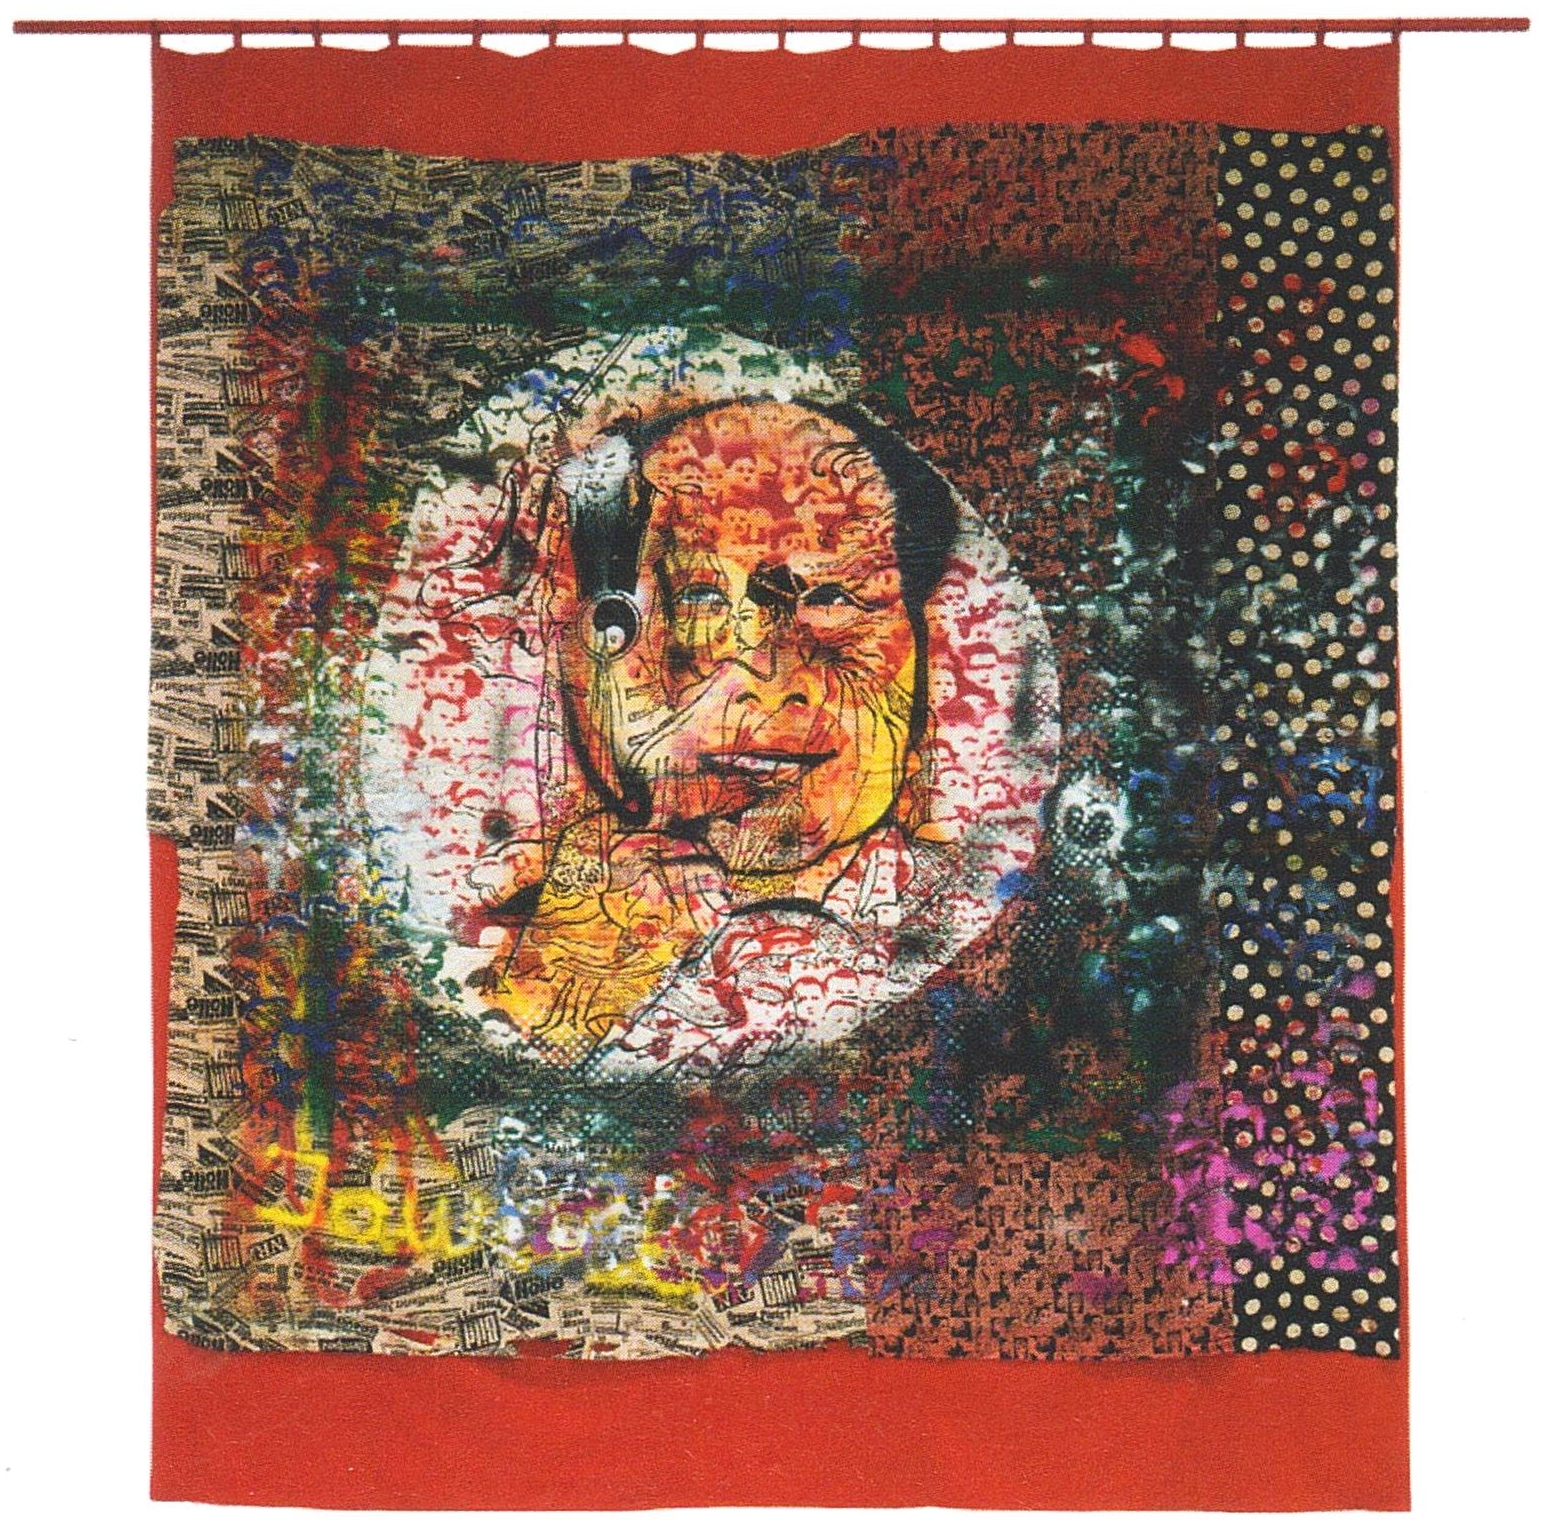 SIGMAR POLKE
Mao
1972
Synthetic polymer paint on patterned fabric mounted on felt with wooden dowel
overall: 12&rsquo; 3&rdquo; x 10&rsquo; 3 1/2&rdquo; (373.5 x 314 cm)
The Museum of Modern Art, New York